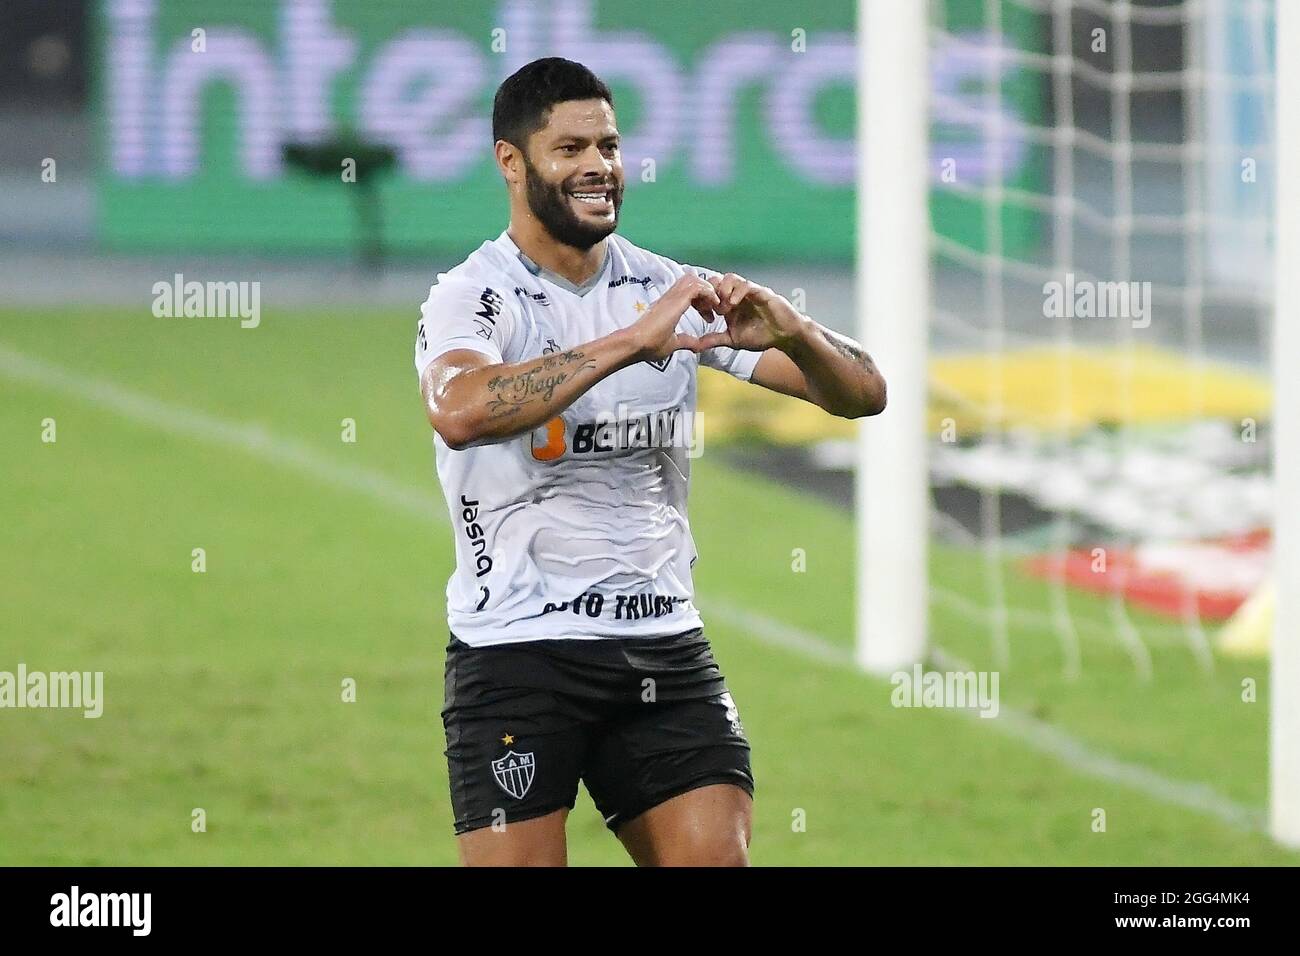 Rio de Janeiro, Brazil, August 26, 2021. Hulk football player from Atlético-MG team celebrates his goal during the game against Fluminense for the Bra Stock Photo